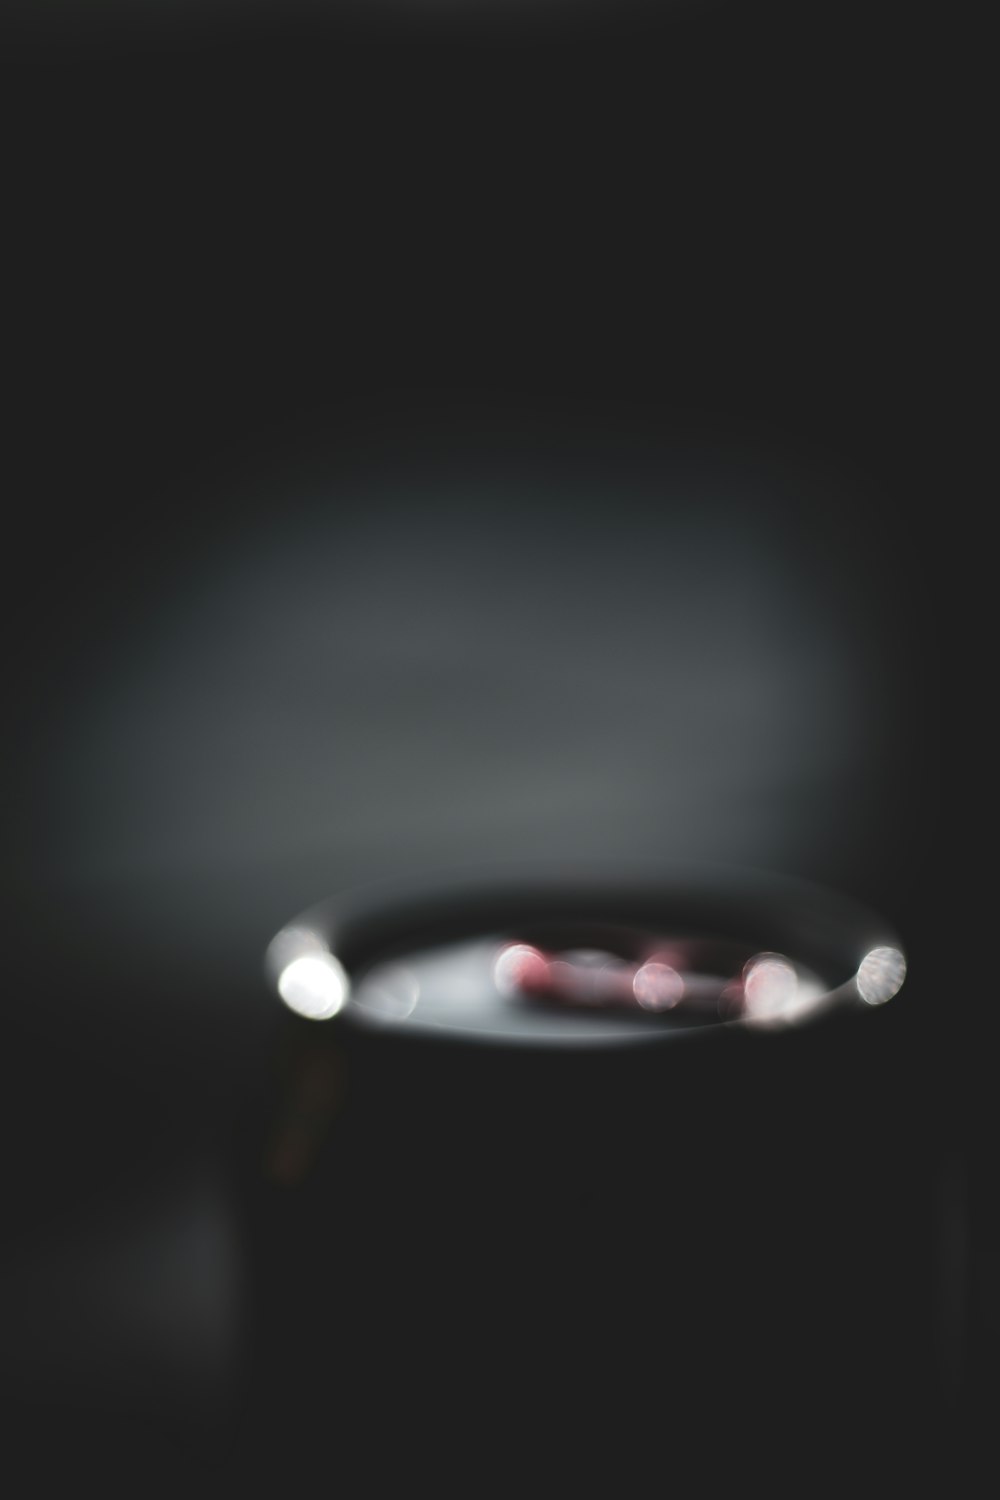 a close up of a black object with a blurry background